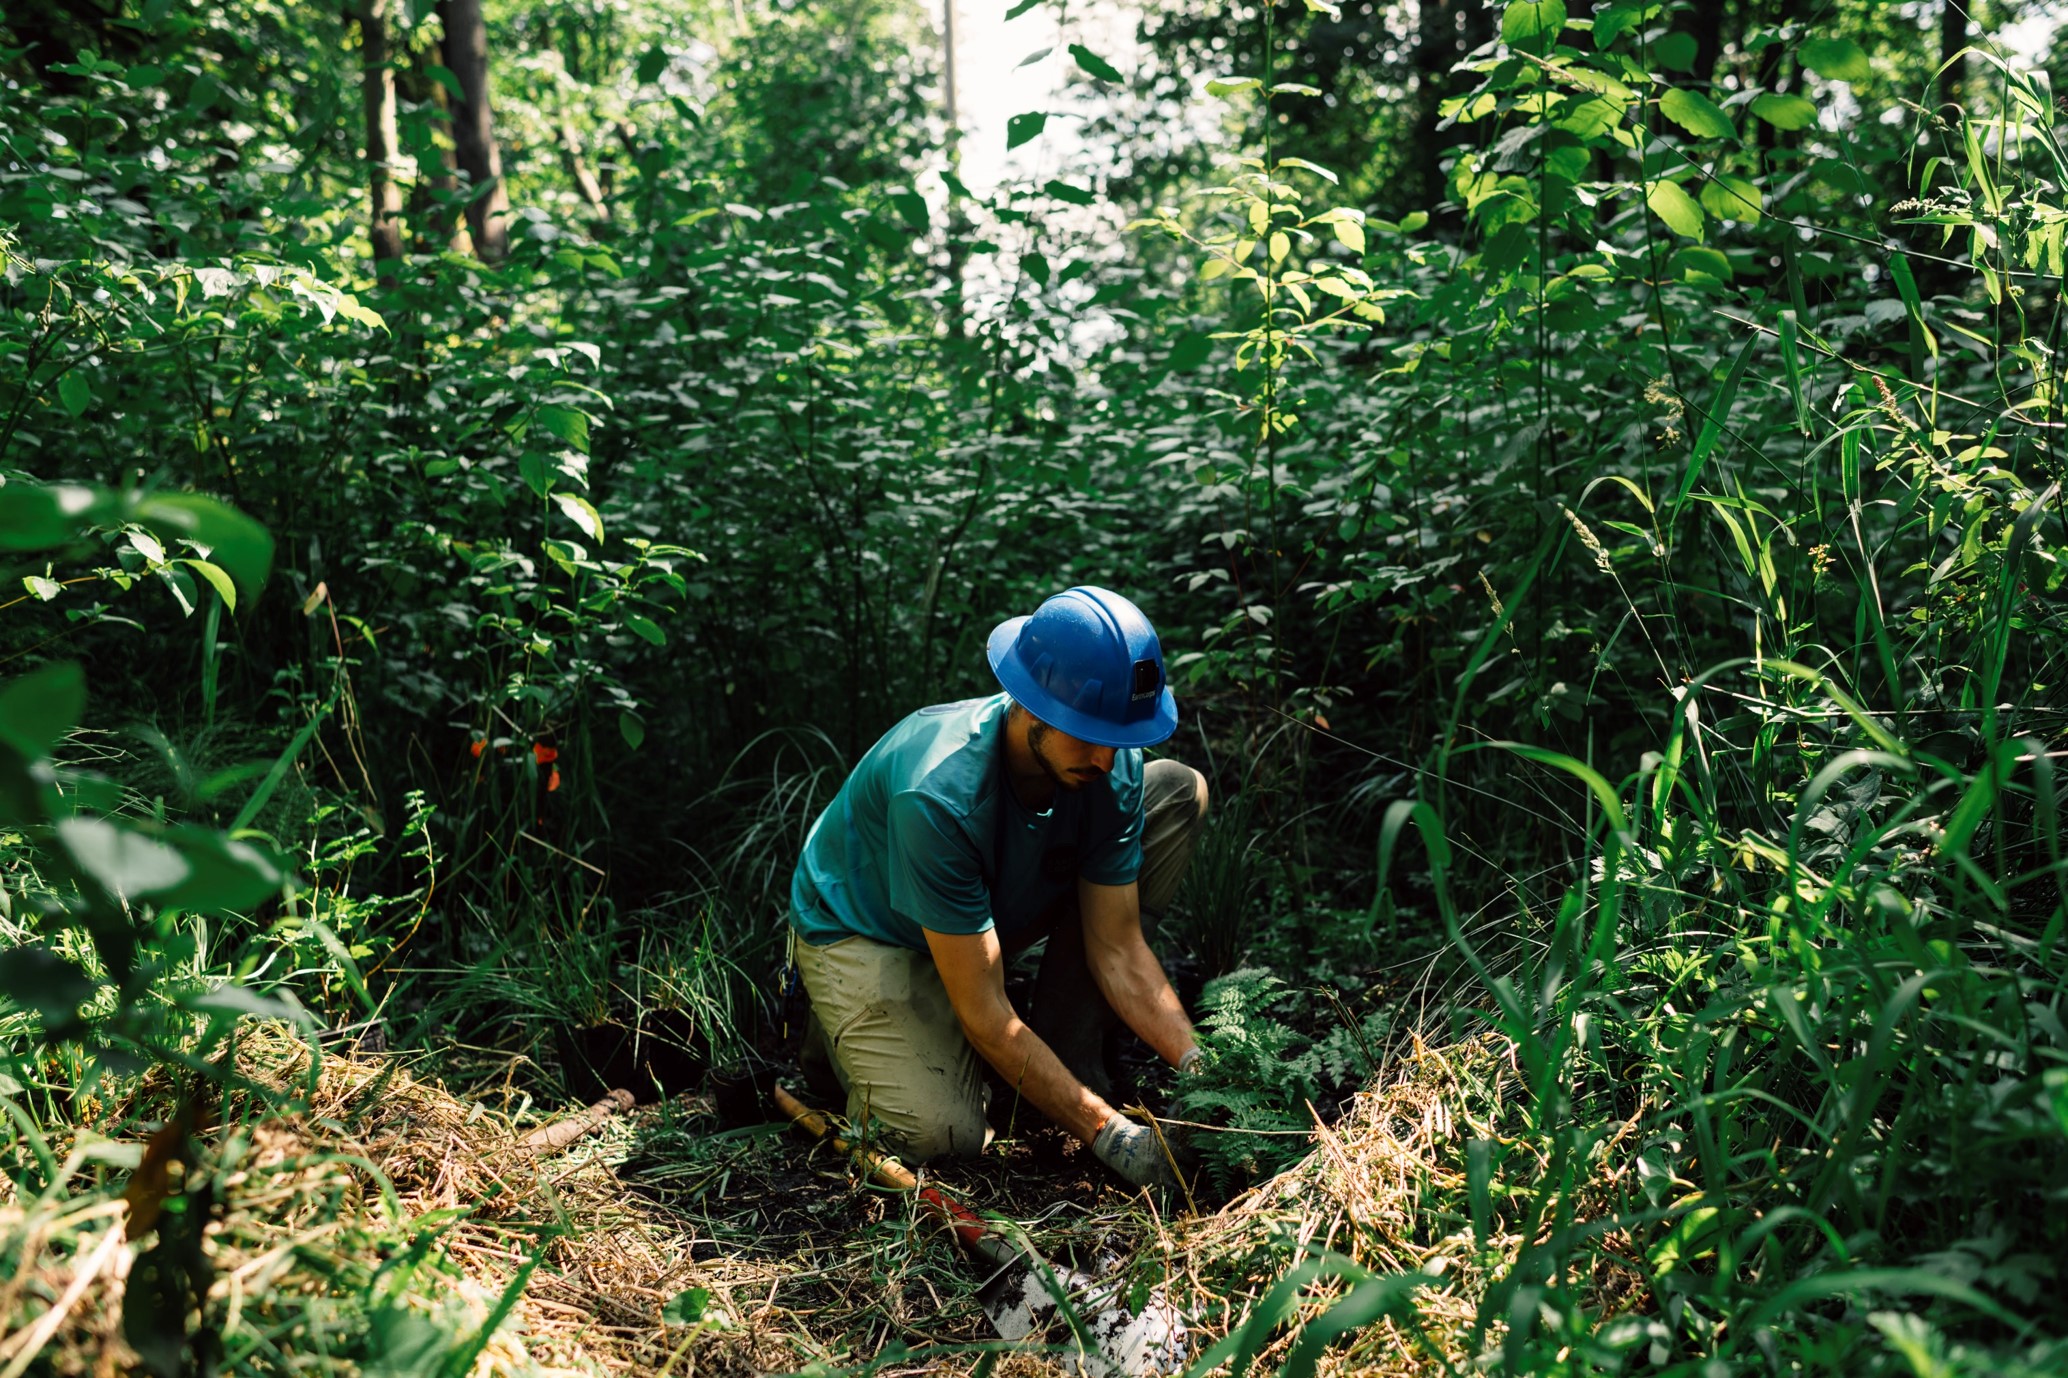 Corps Member in a forested area, wearing a hard hat and planting a plant in the ground.